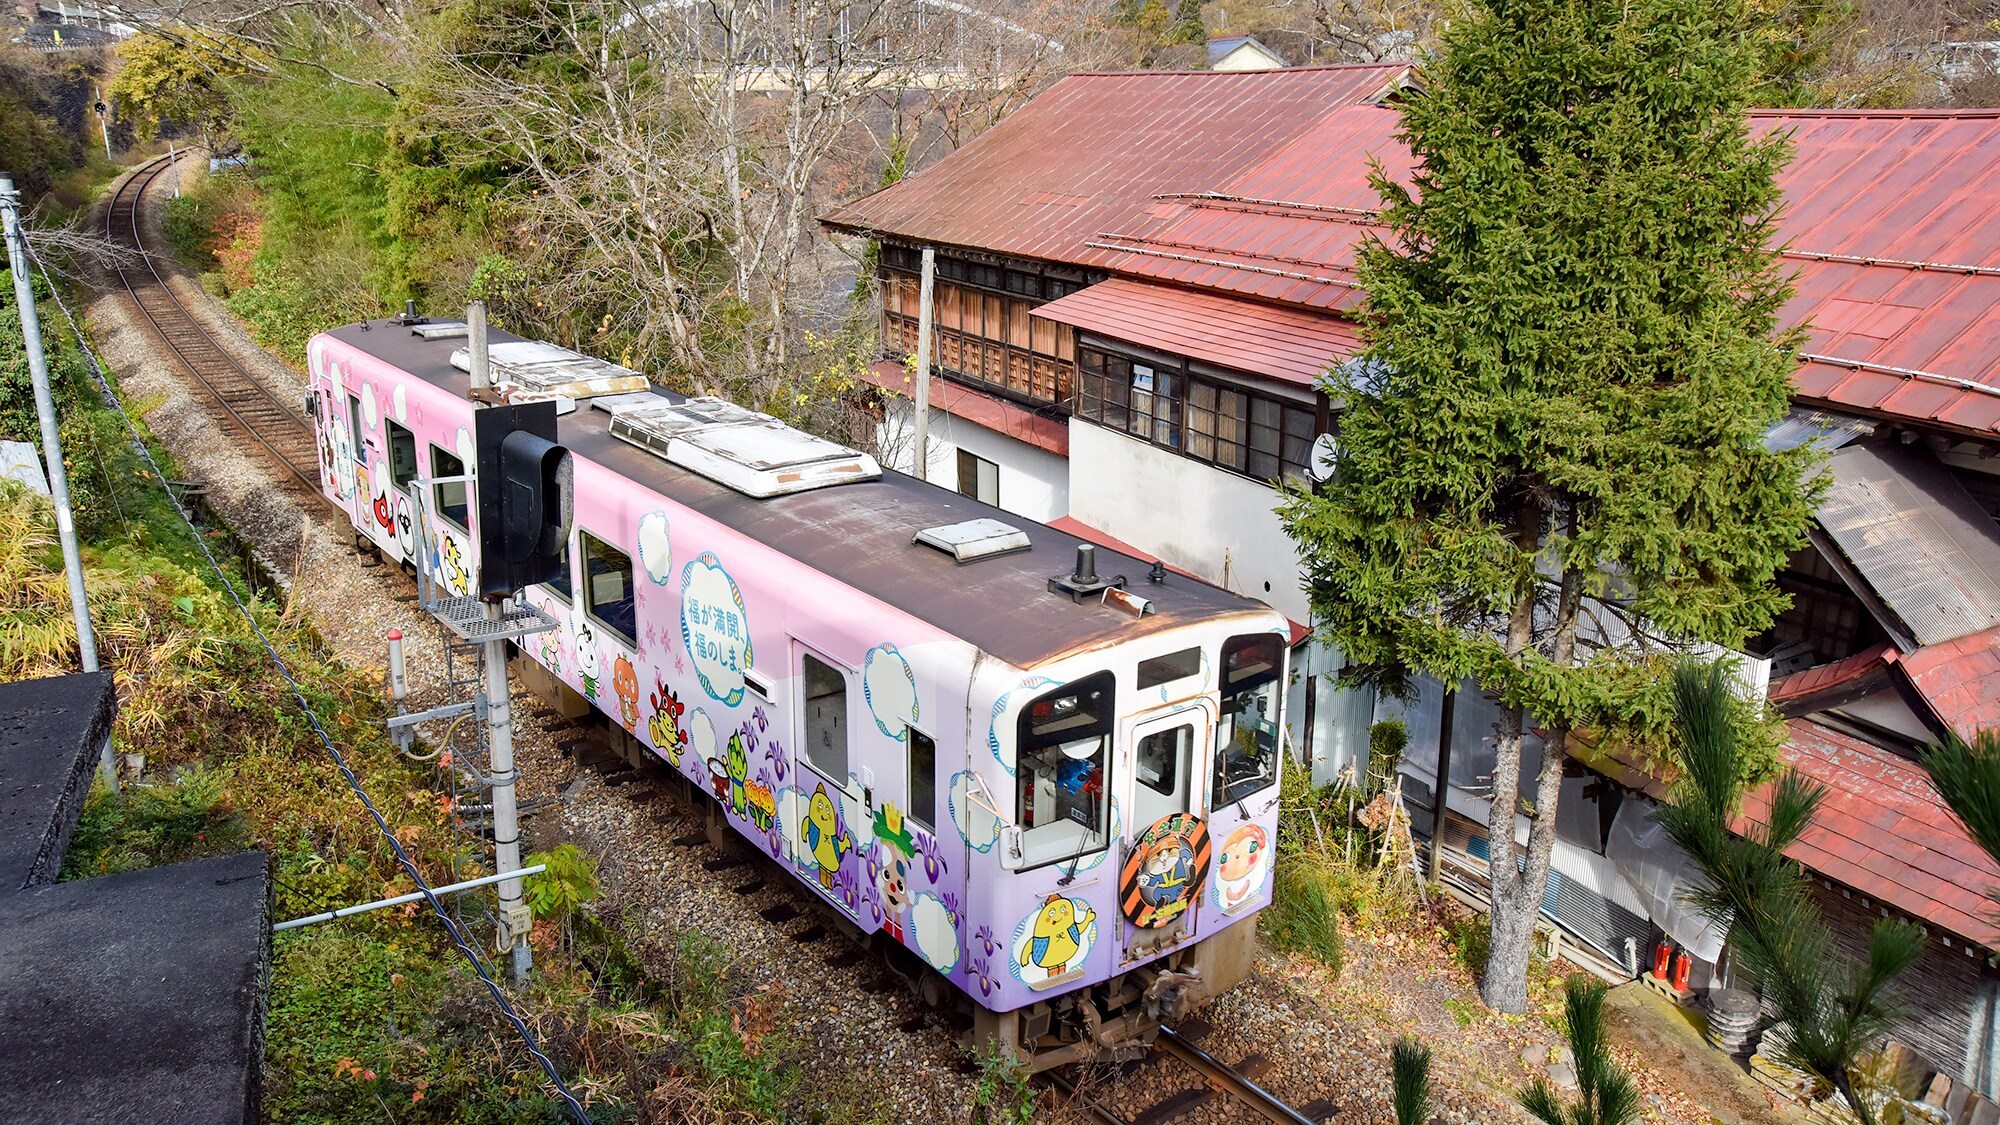 * View from the guest room / Enjoy the train view while relaxing in the guest room ♪